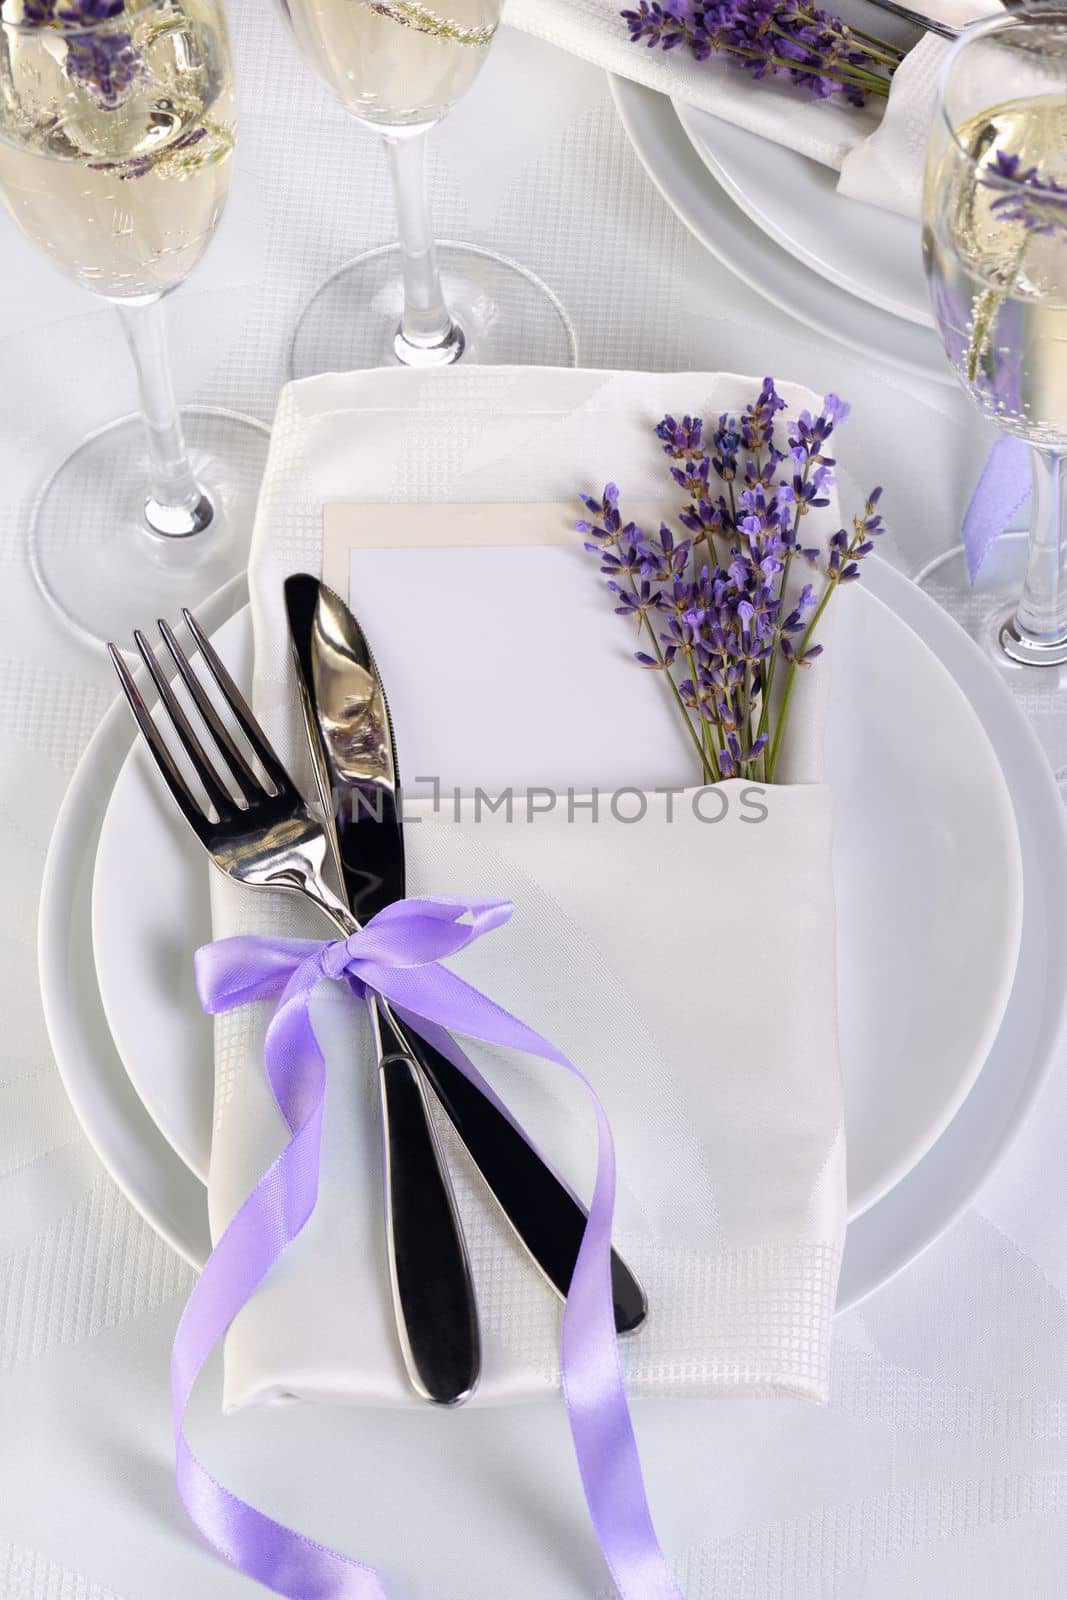 Lavender mood. Dining table in Provence style, with Lavender Champagne, folded napkin with cutlery, decorated with fresh lavender. Detail of the wedding dinner. Wedding theme ideas.